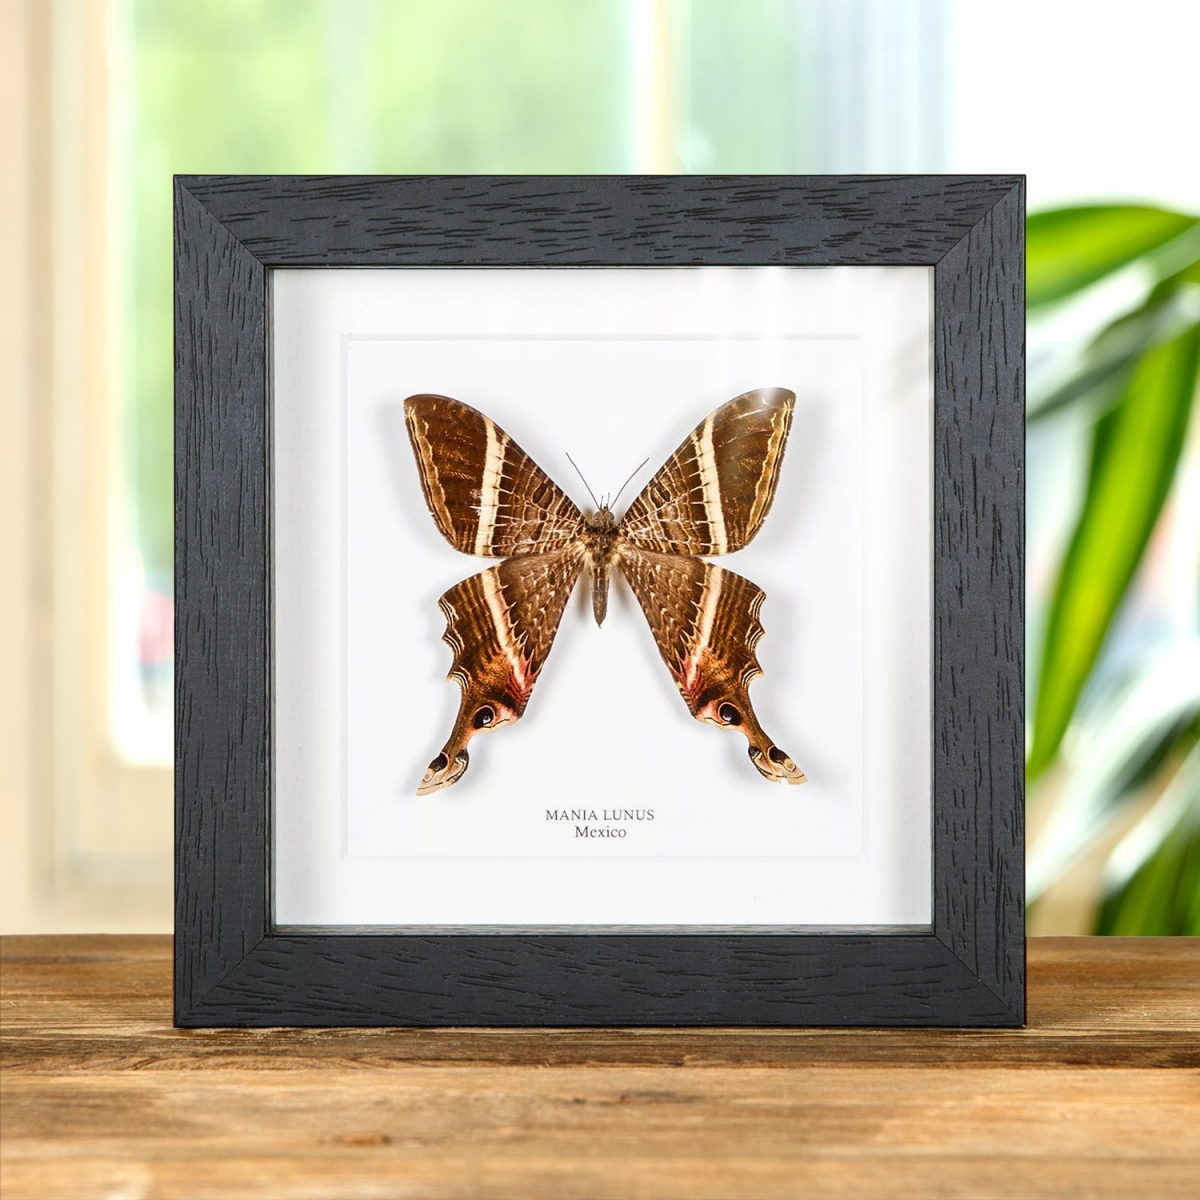 Minibeast Mania lunus Moth In Box Frame from Mexico